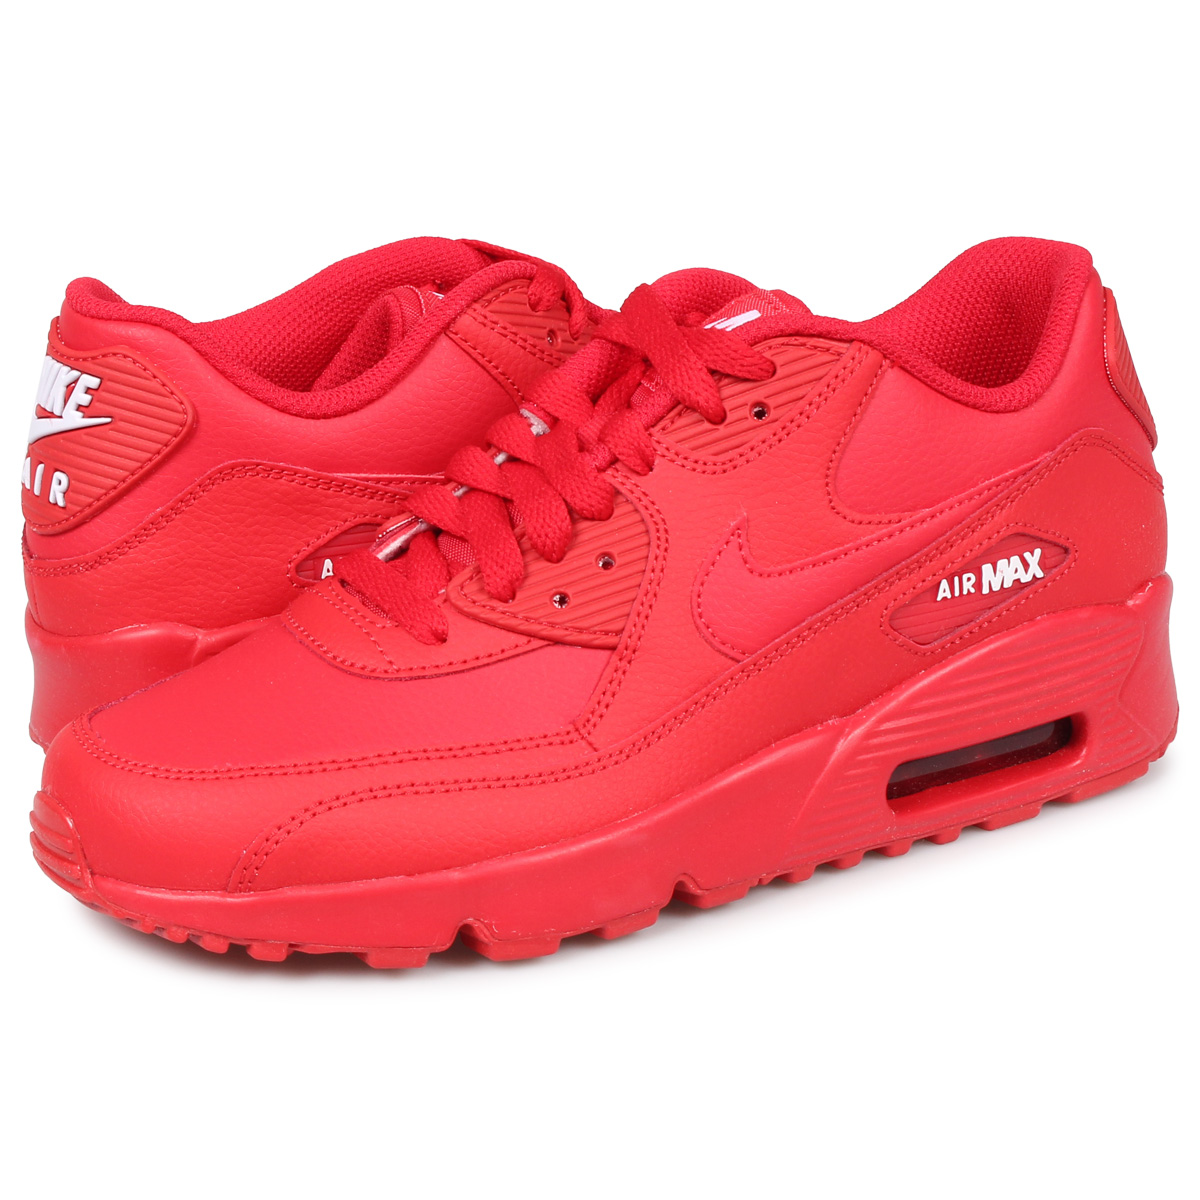 air max 90 red leather